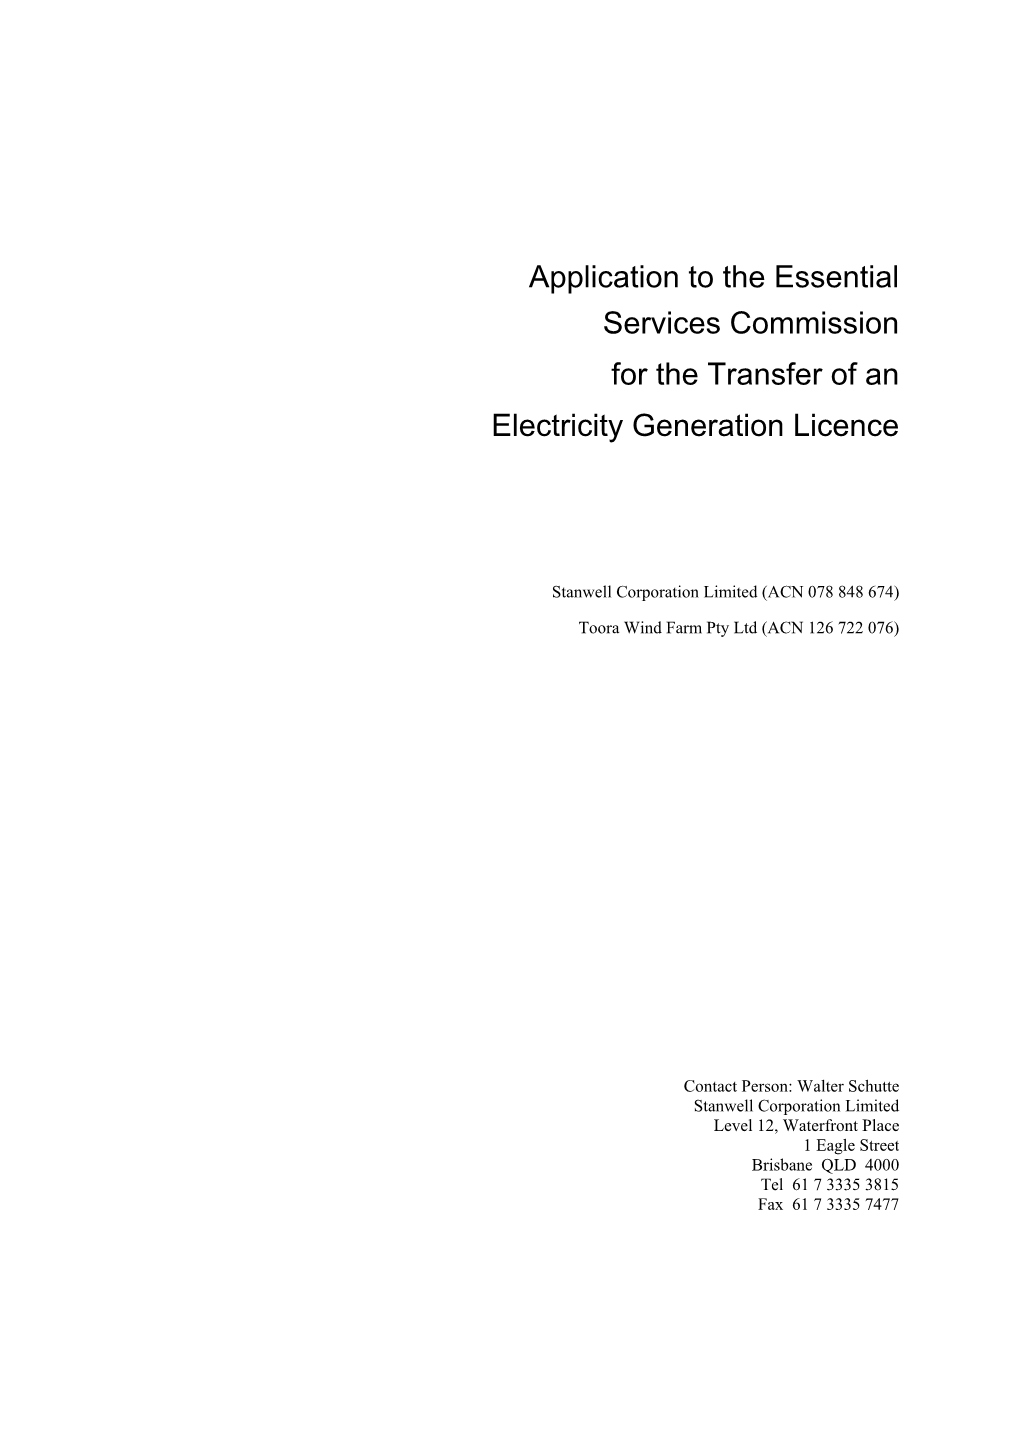 Application to the Essential Services Commission for the Transfer of an Electricity Generation Licence